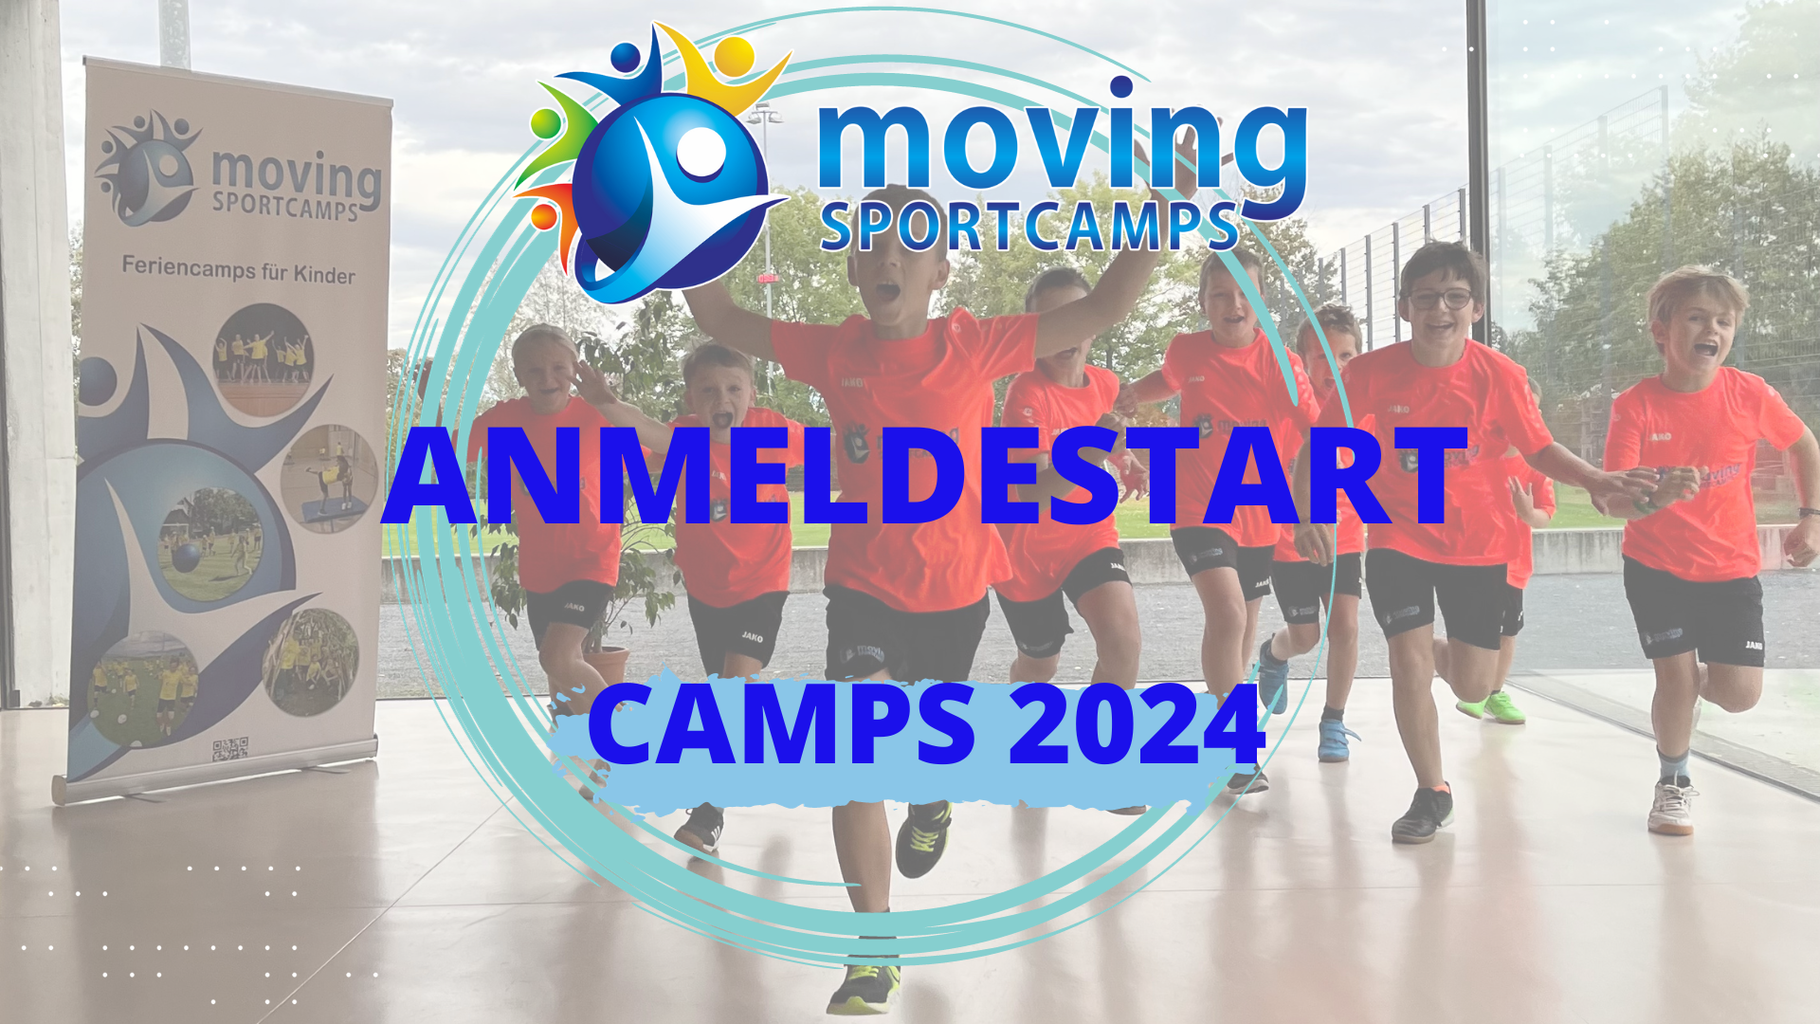 (c) Moving-sportcamps.ch